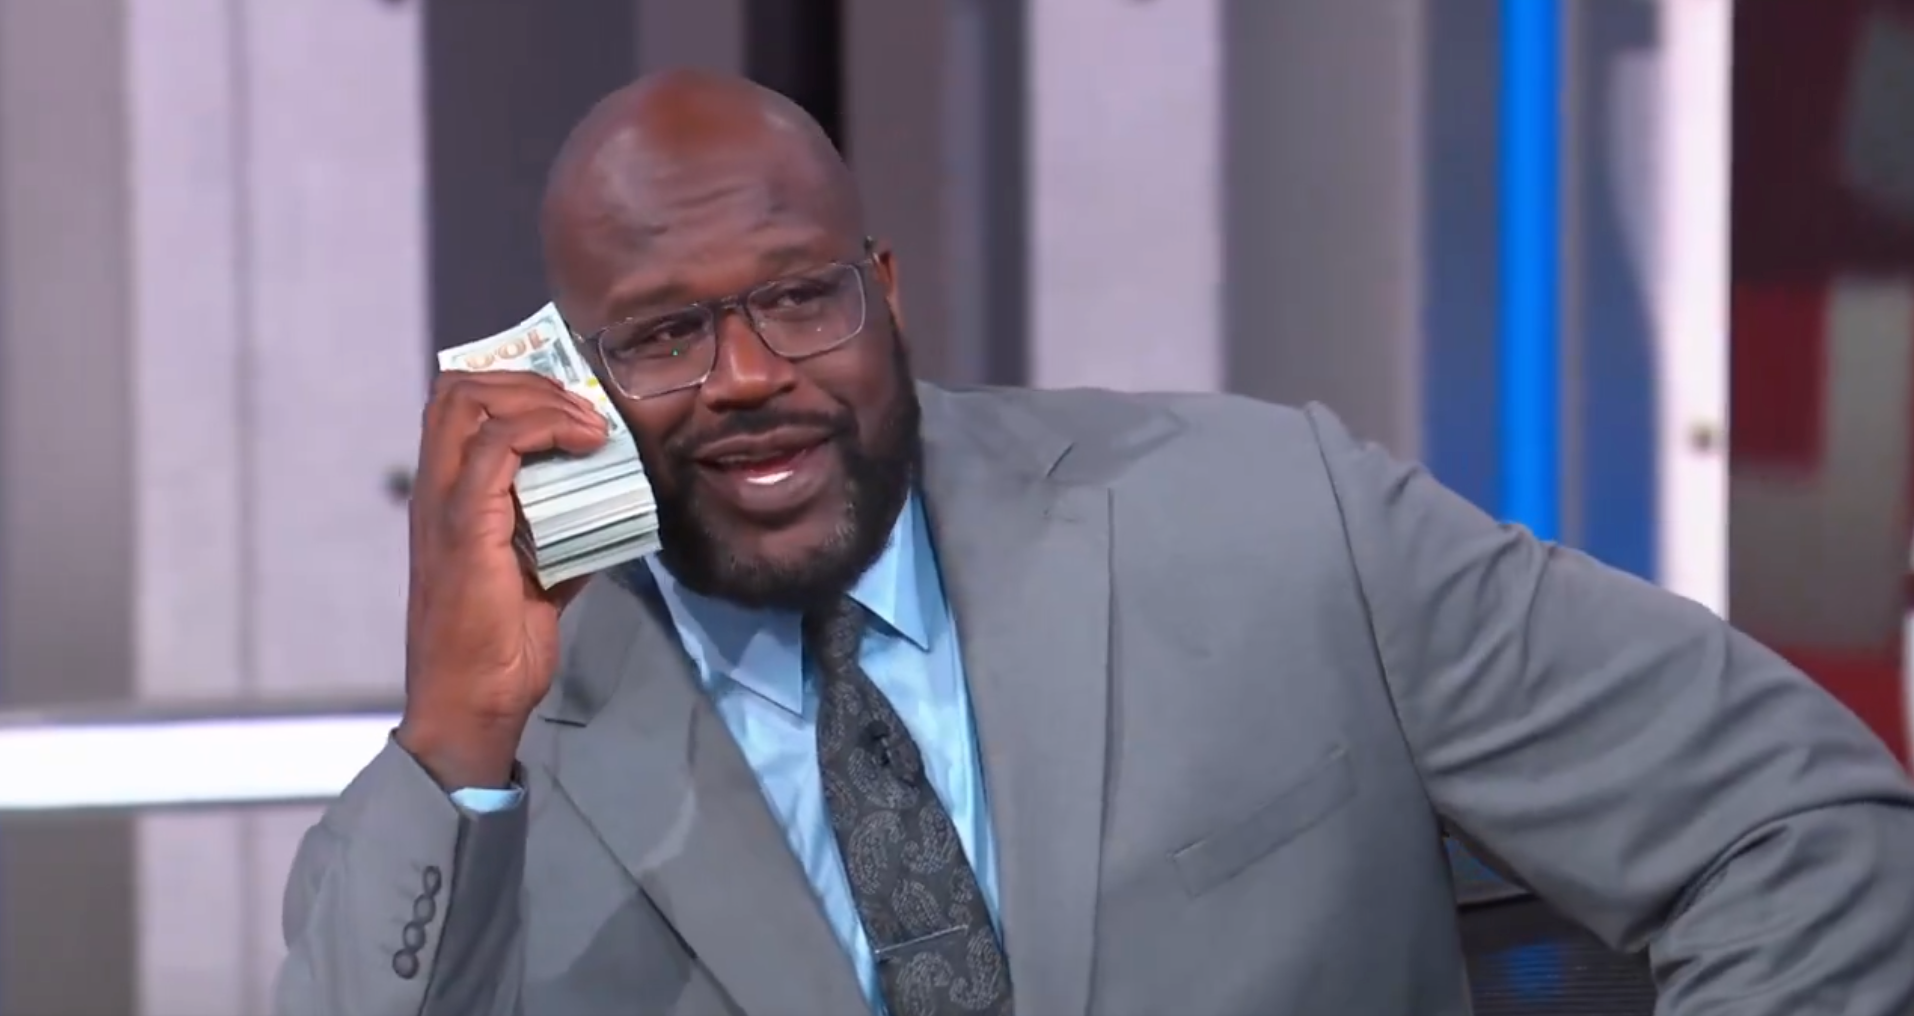 Where was Shaq last night? Why Shaquille O'Neal was absent from TNT's 'Inside the NBA' show